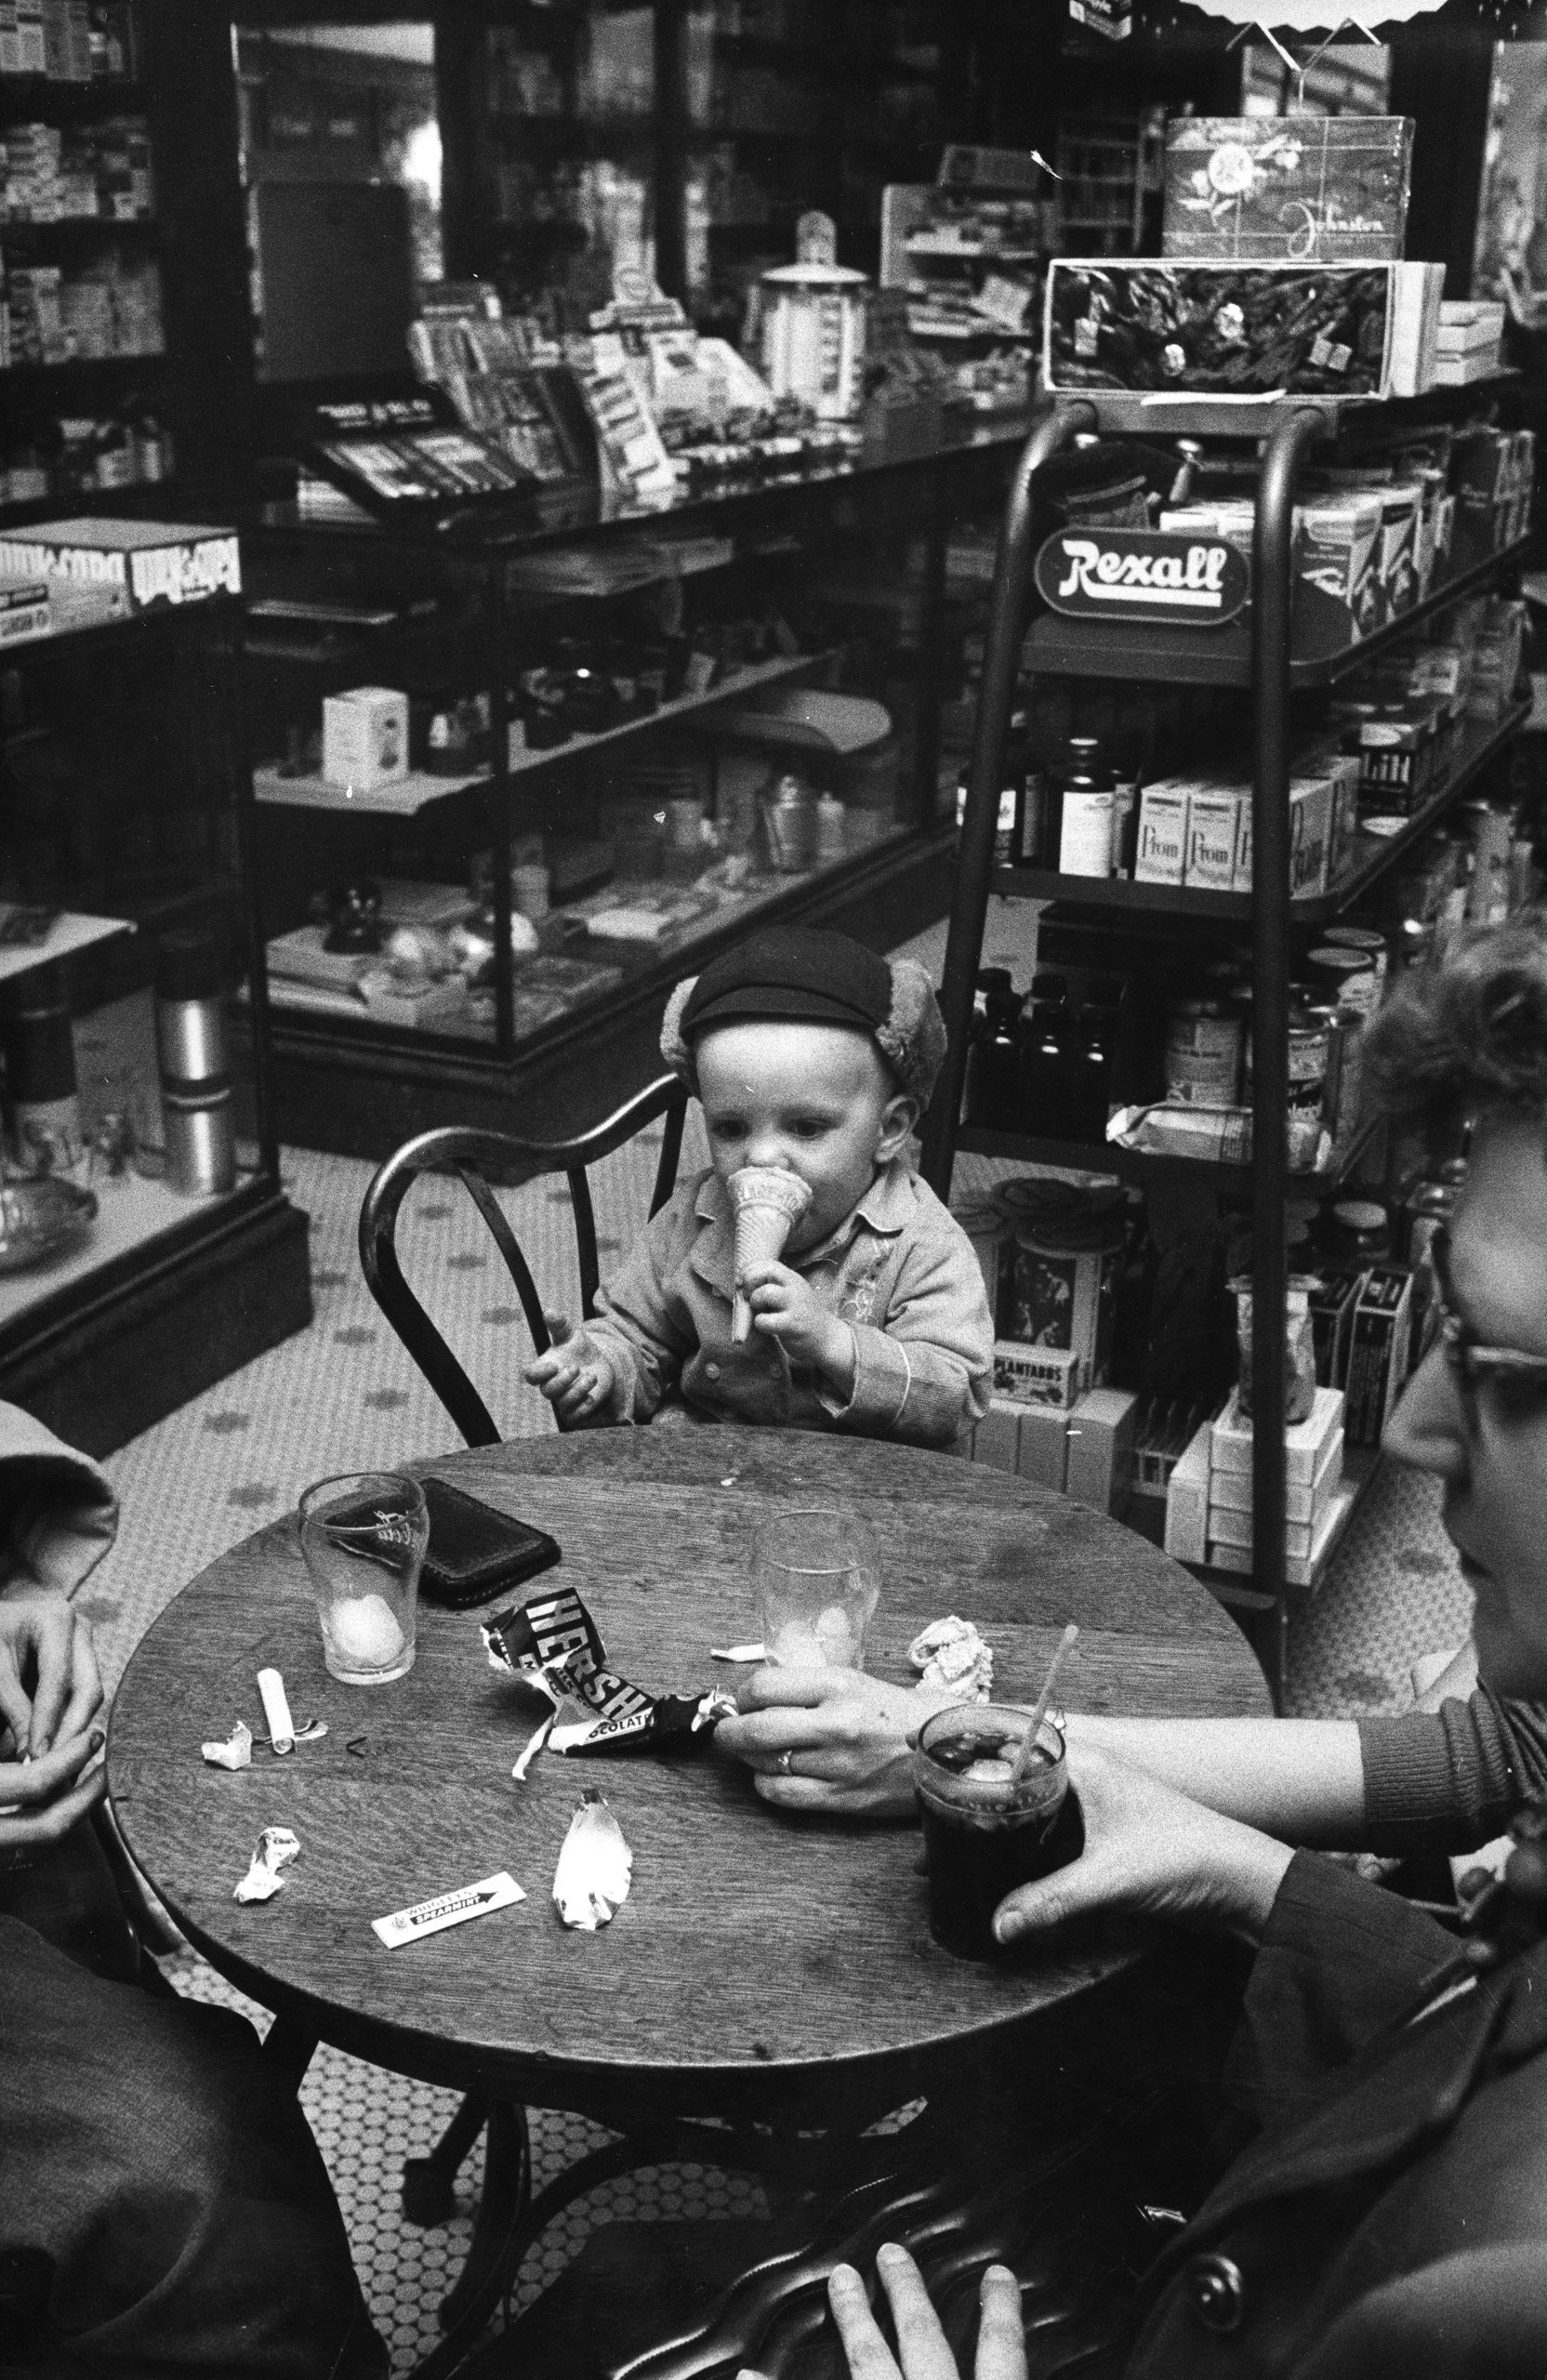 A young boy eating an ice cream cone at the local drugstore, 1957.